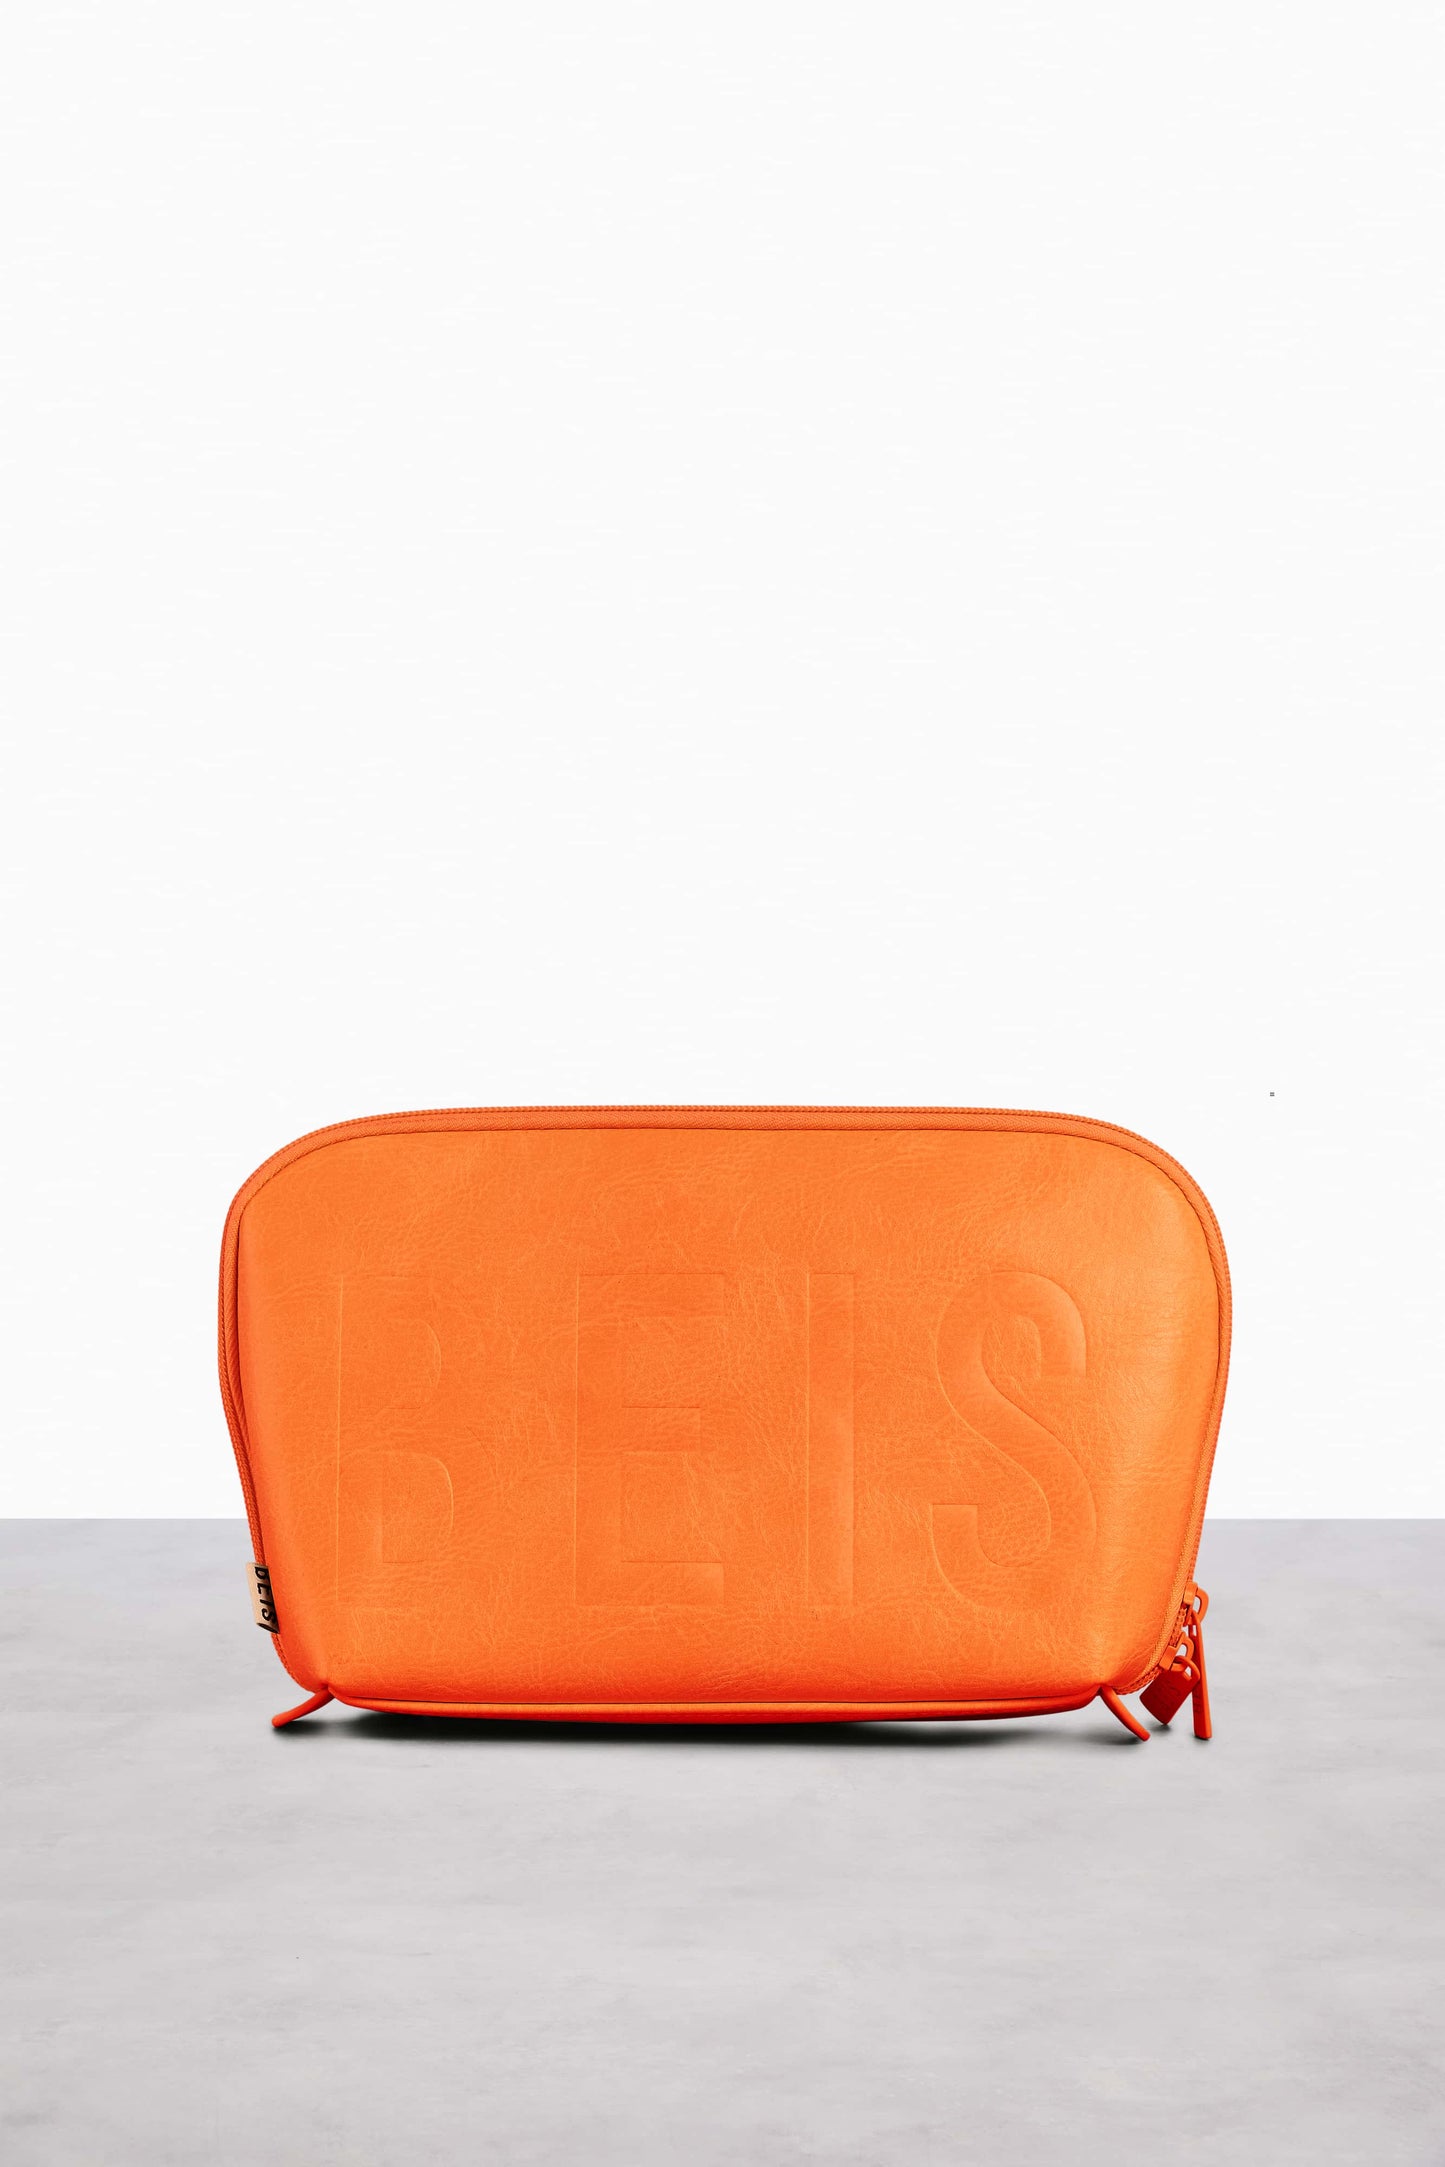 The Cosmetic Pouch Set in Creamsicle